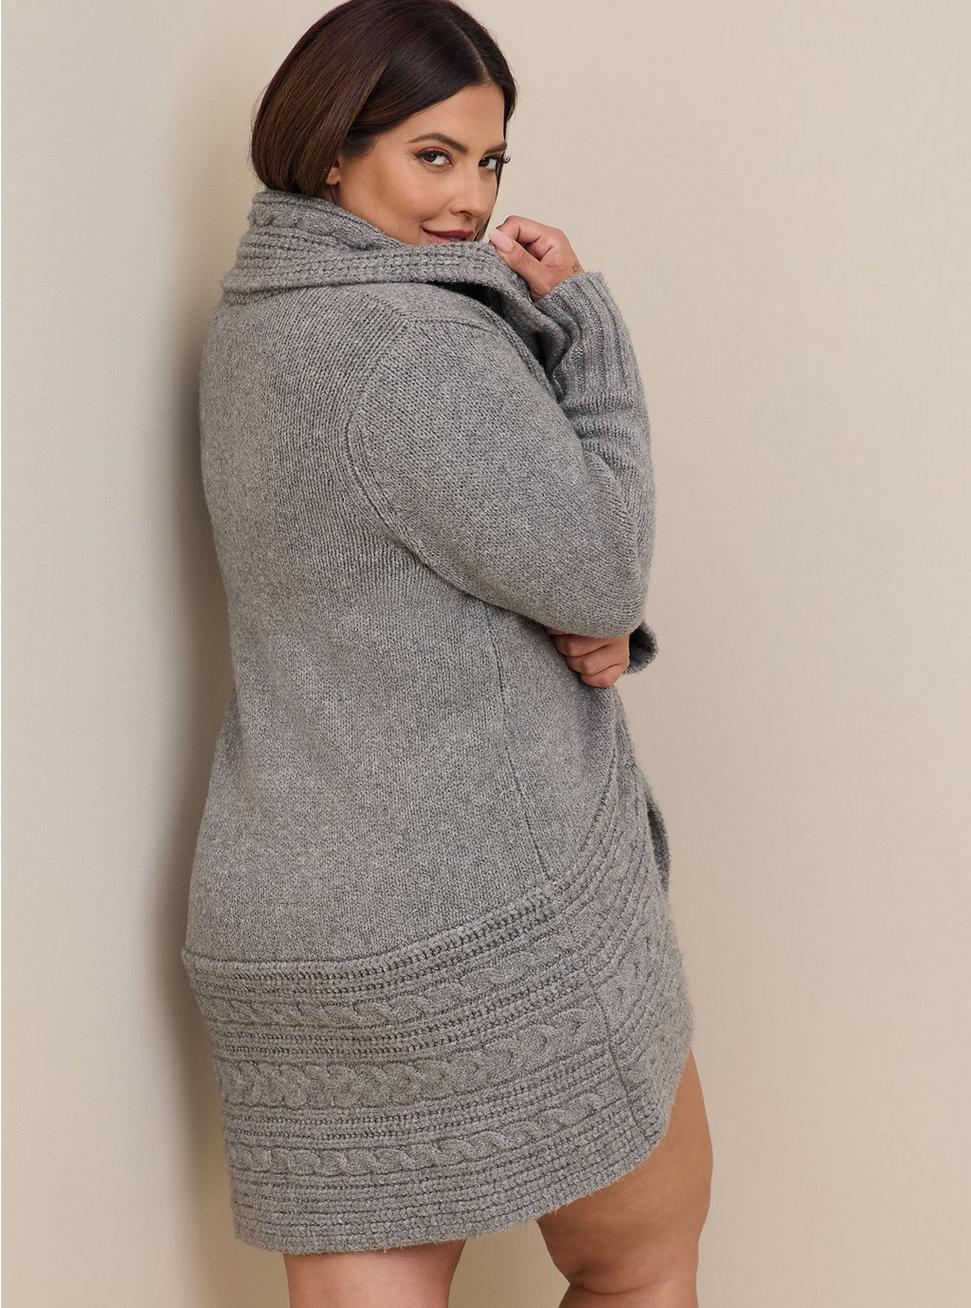 Chunky Cocoon Coatigan Cable Sweater, HEATHER GREY, alternate